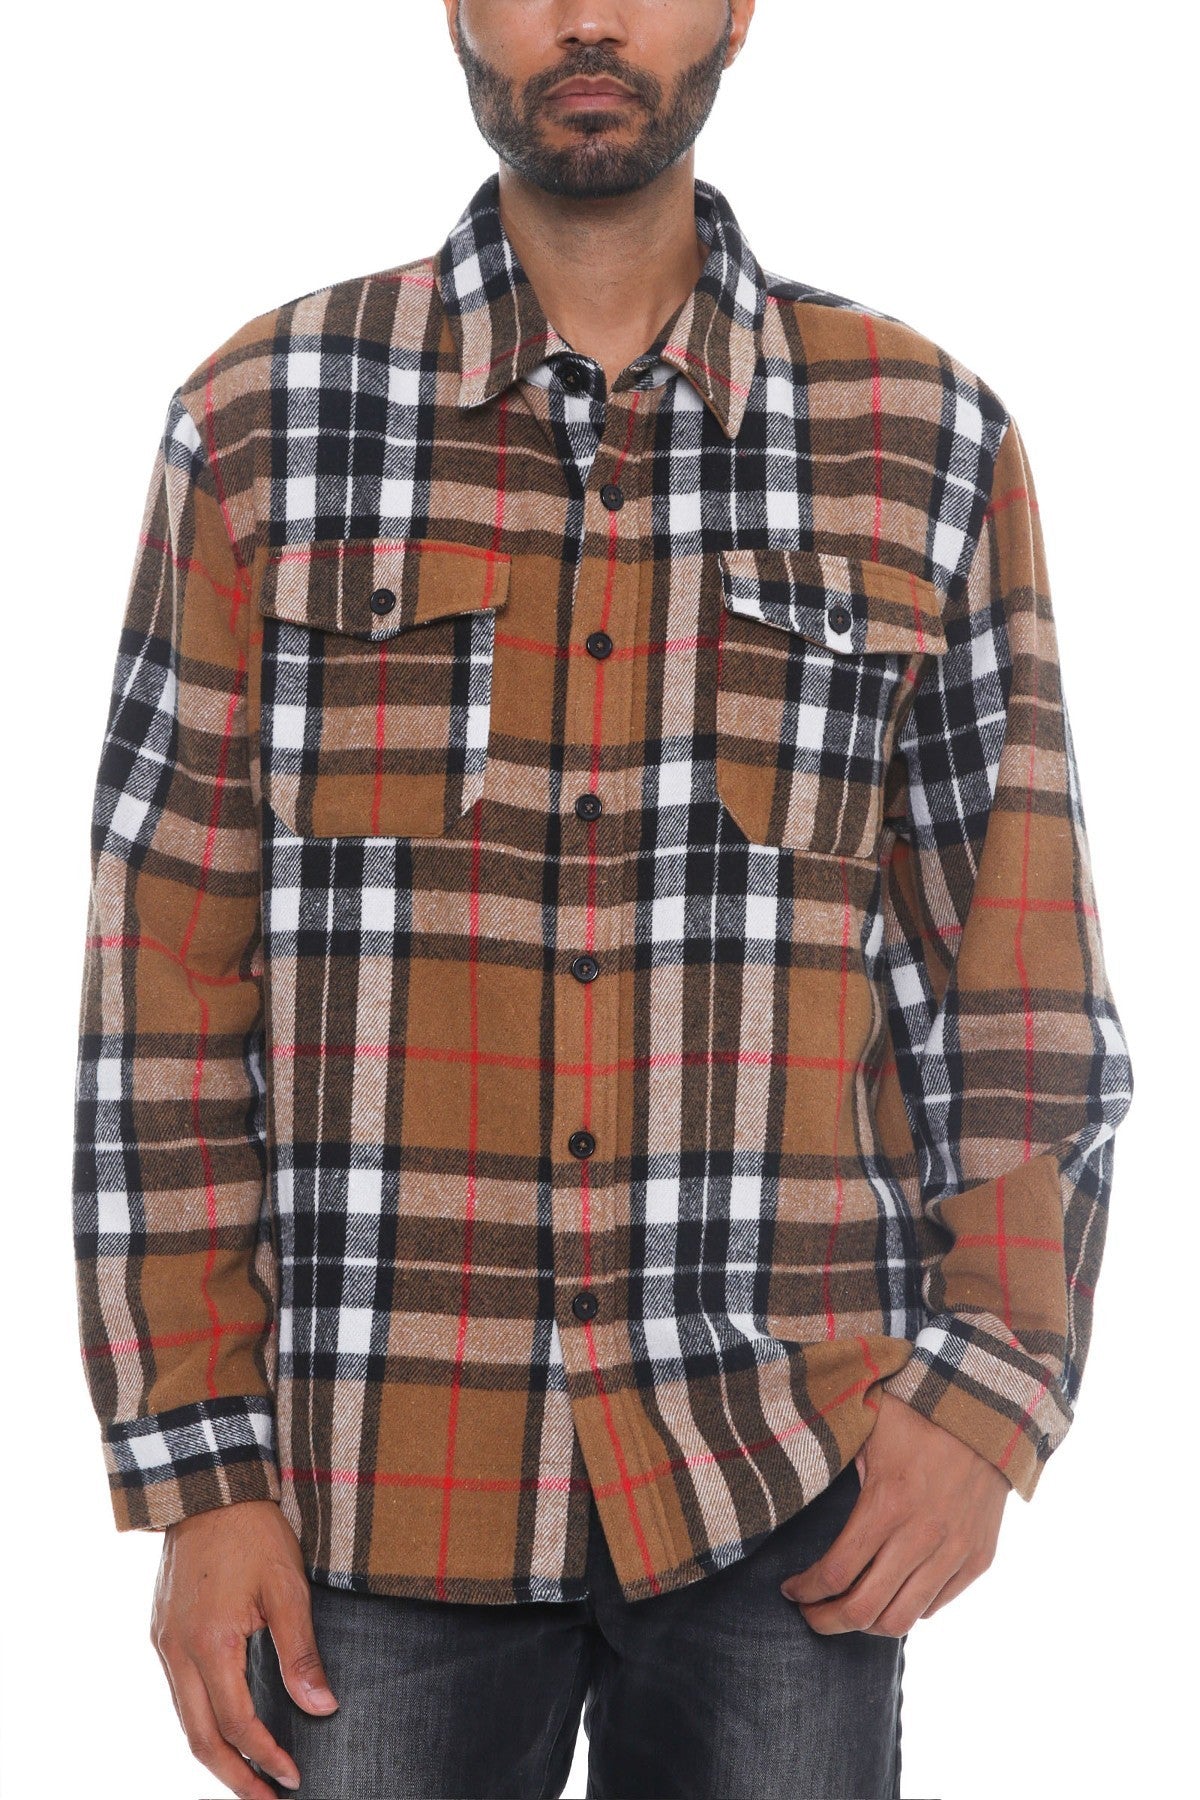 Camel - Men's Checkered Soft Flannel Shacket - 8 colors - mens button-up shirt at TFC&H Co.